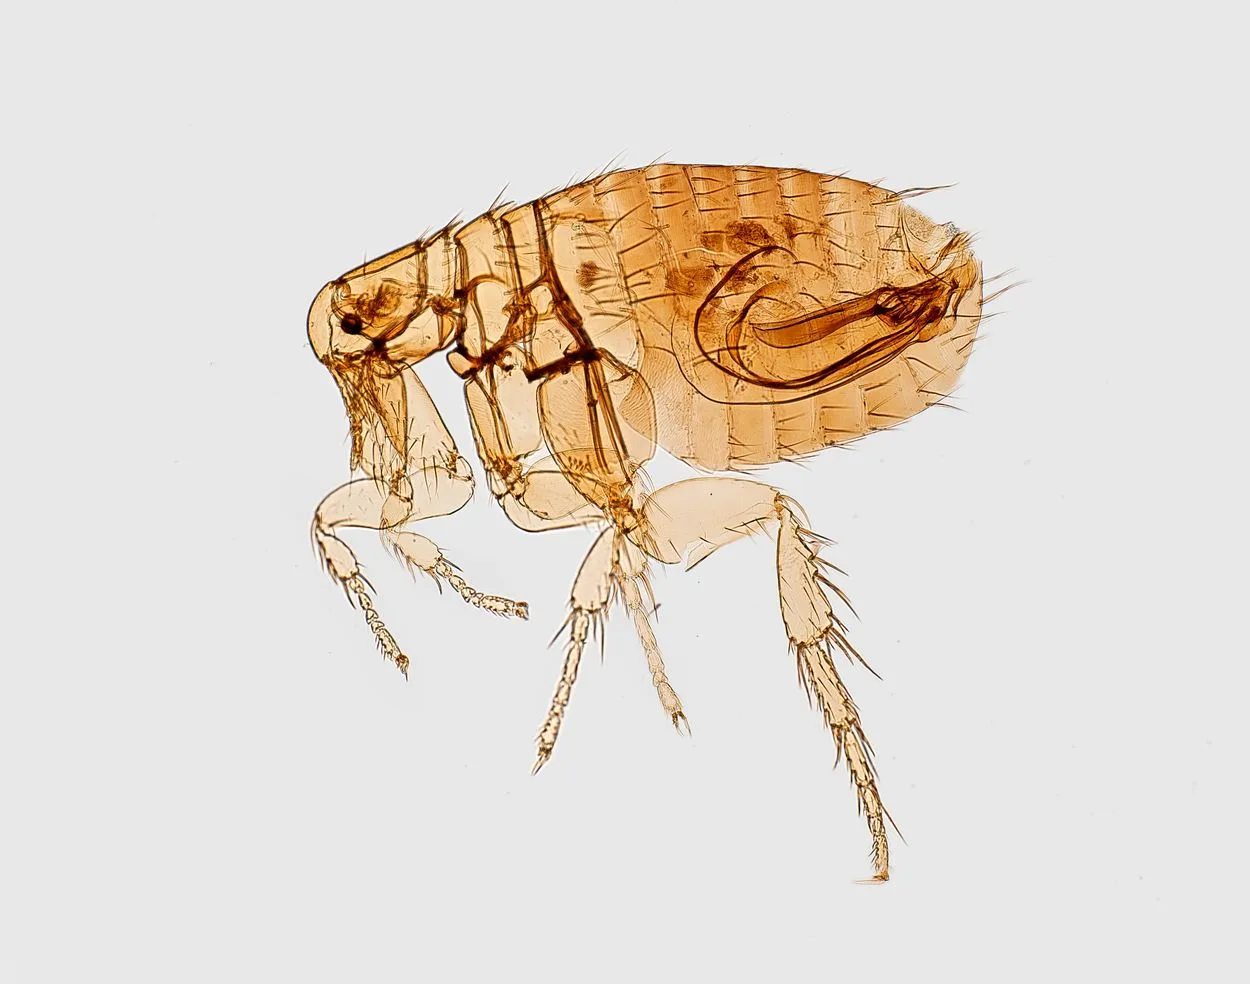 What Diseases Do Fleas Carry?